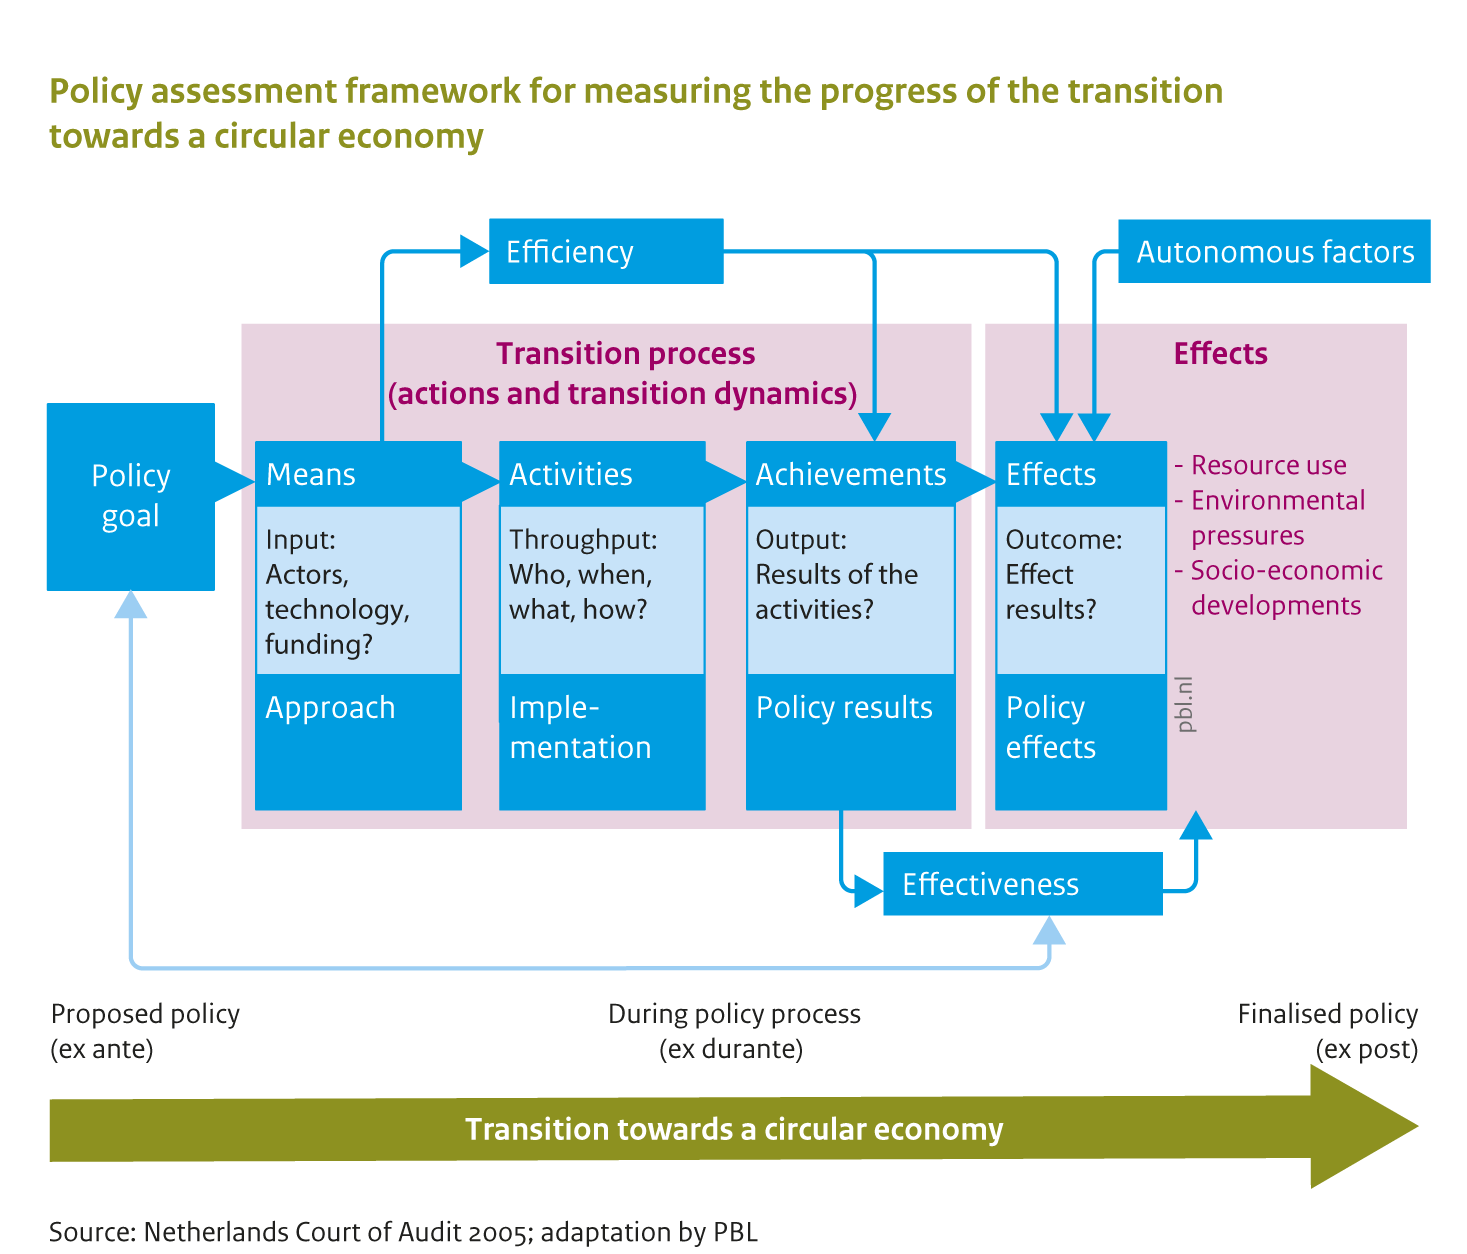 Policy assessment framework for measuring the progress of the transition towards a circular economy